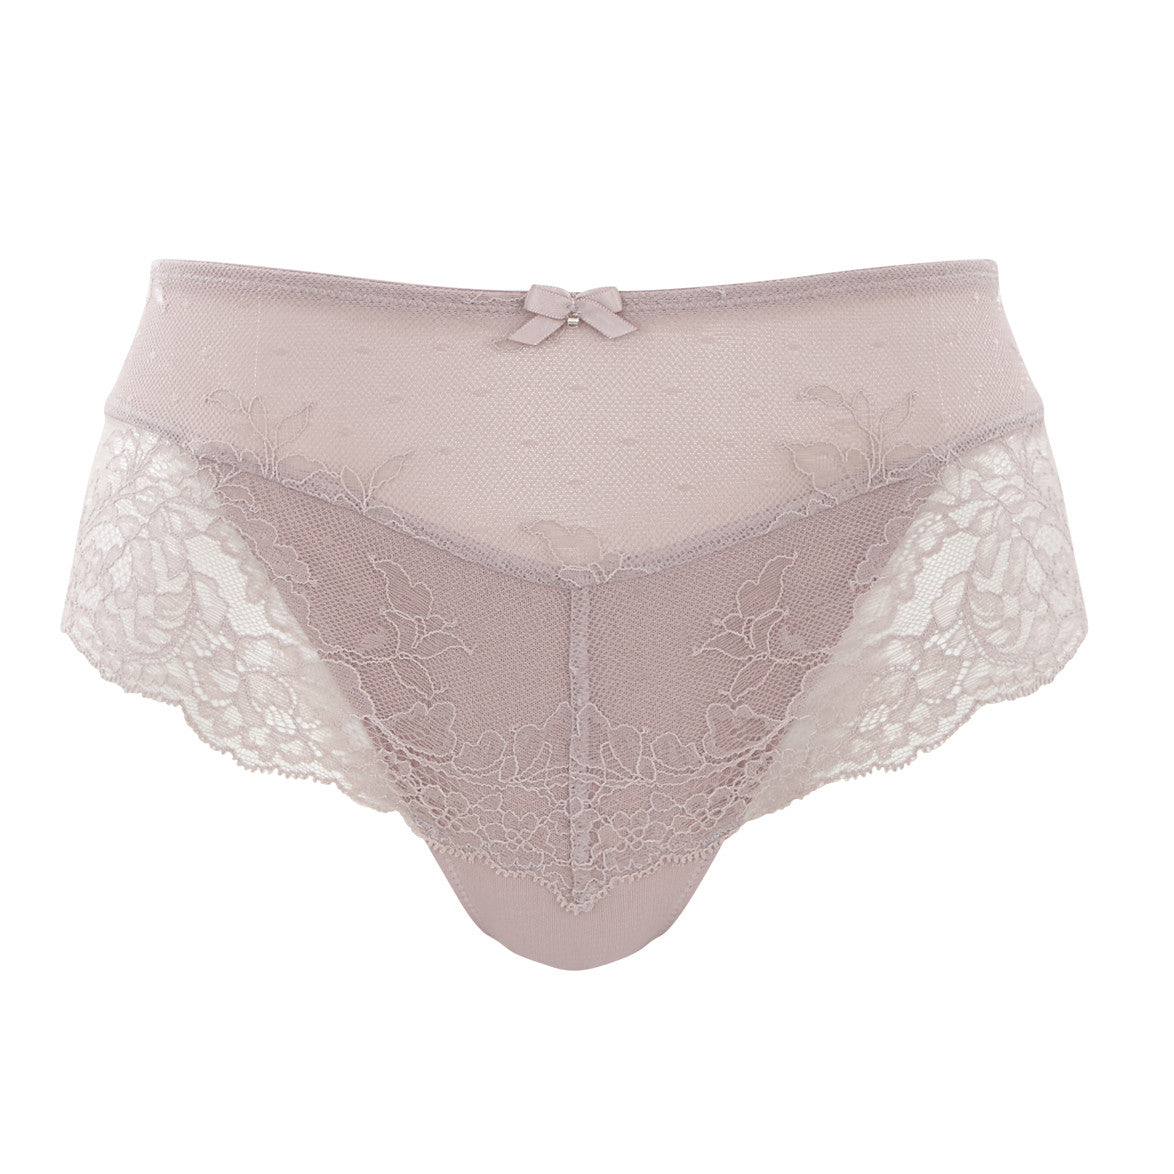 Ana Brief - Vintage front view product image